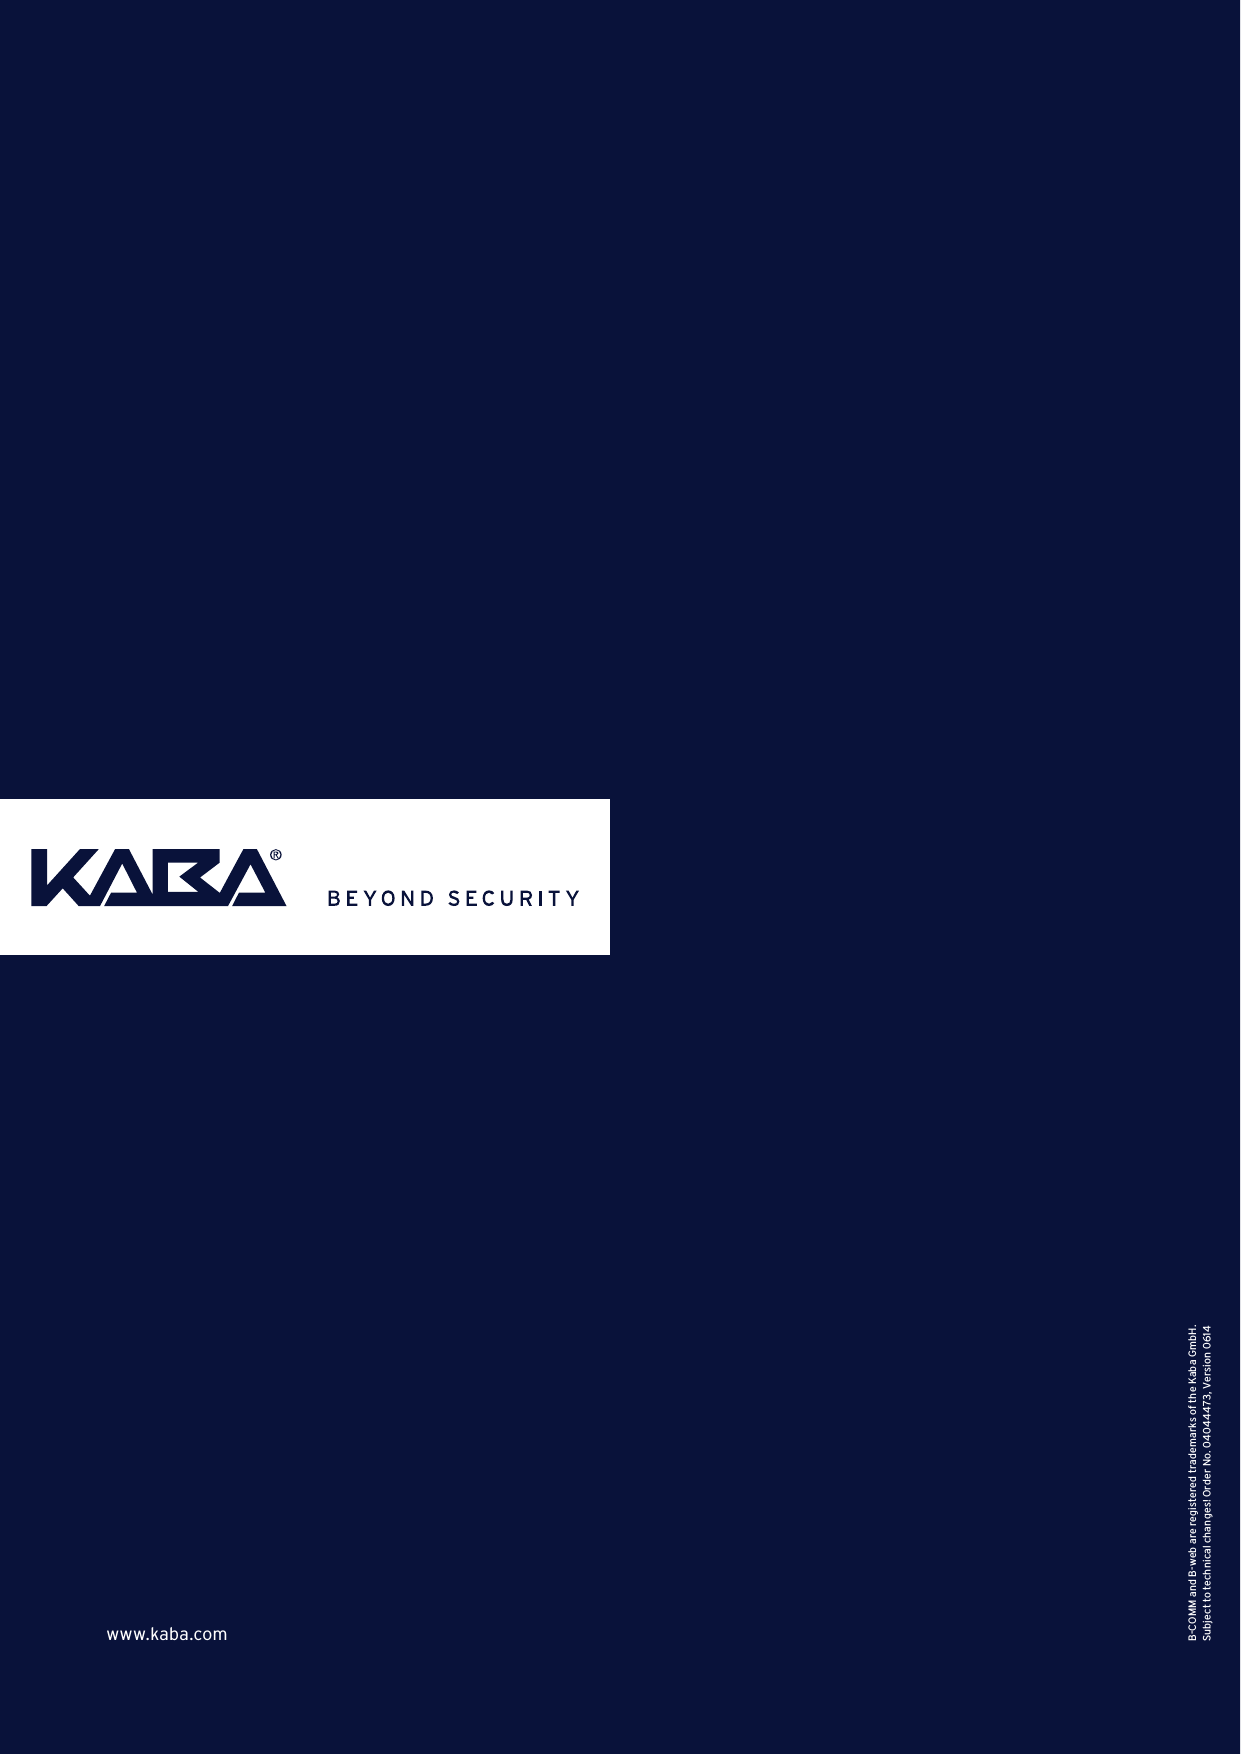 www.kaba.comB-COMM and B-web are registered trademarks of the Kaba GmbH. Subject to technical changes! Order No. 04044473, Version 0614